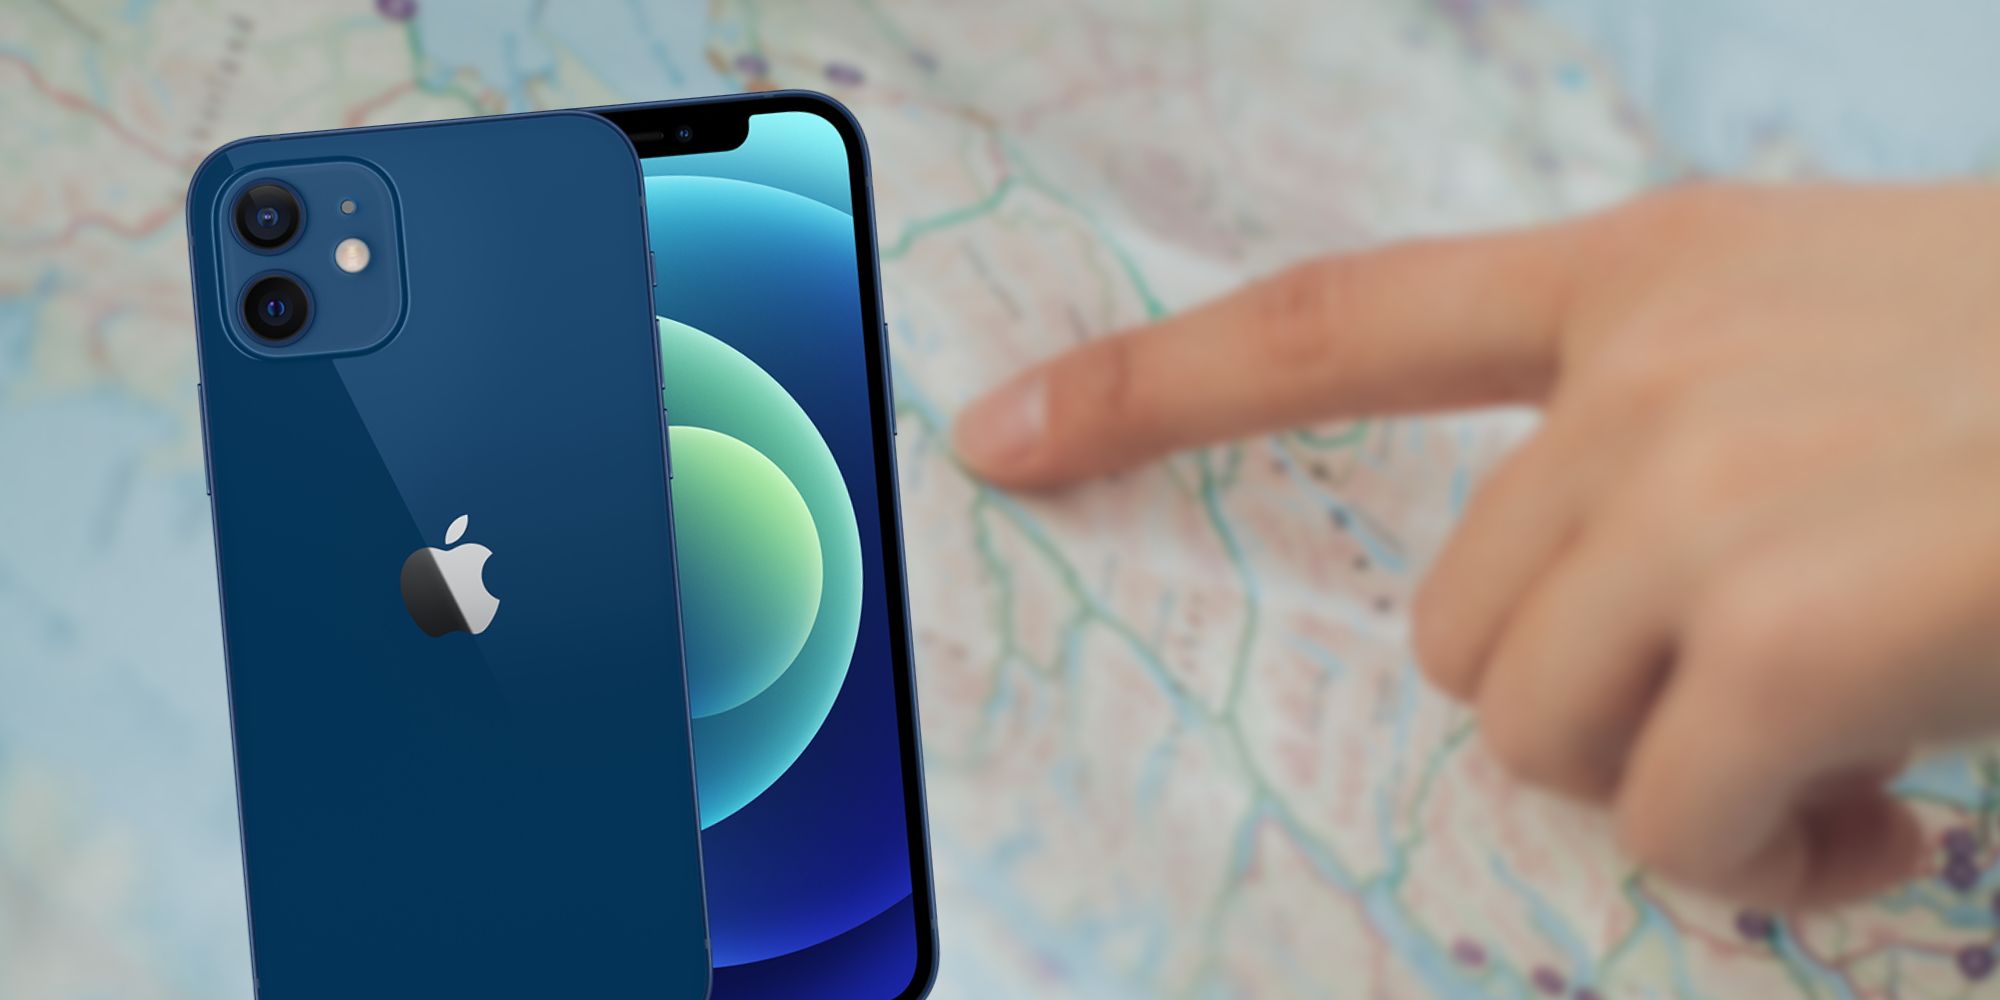 How To Locate Lost iPhone Using Other Apple Devices